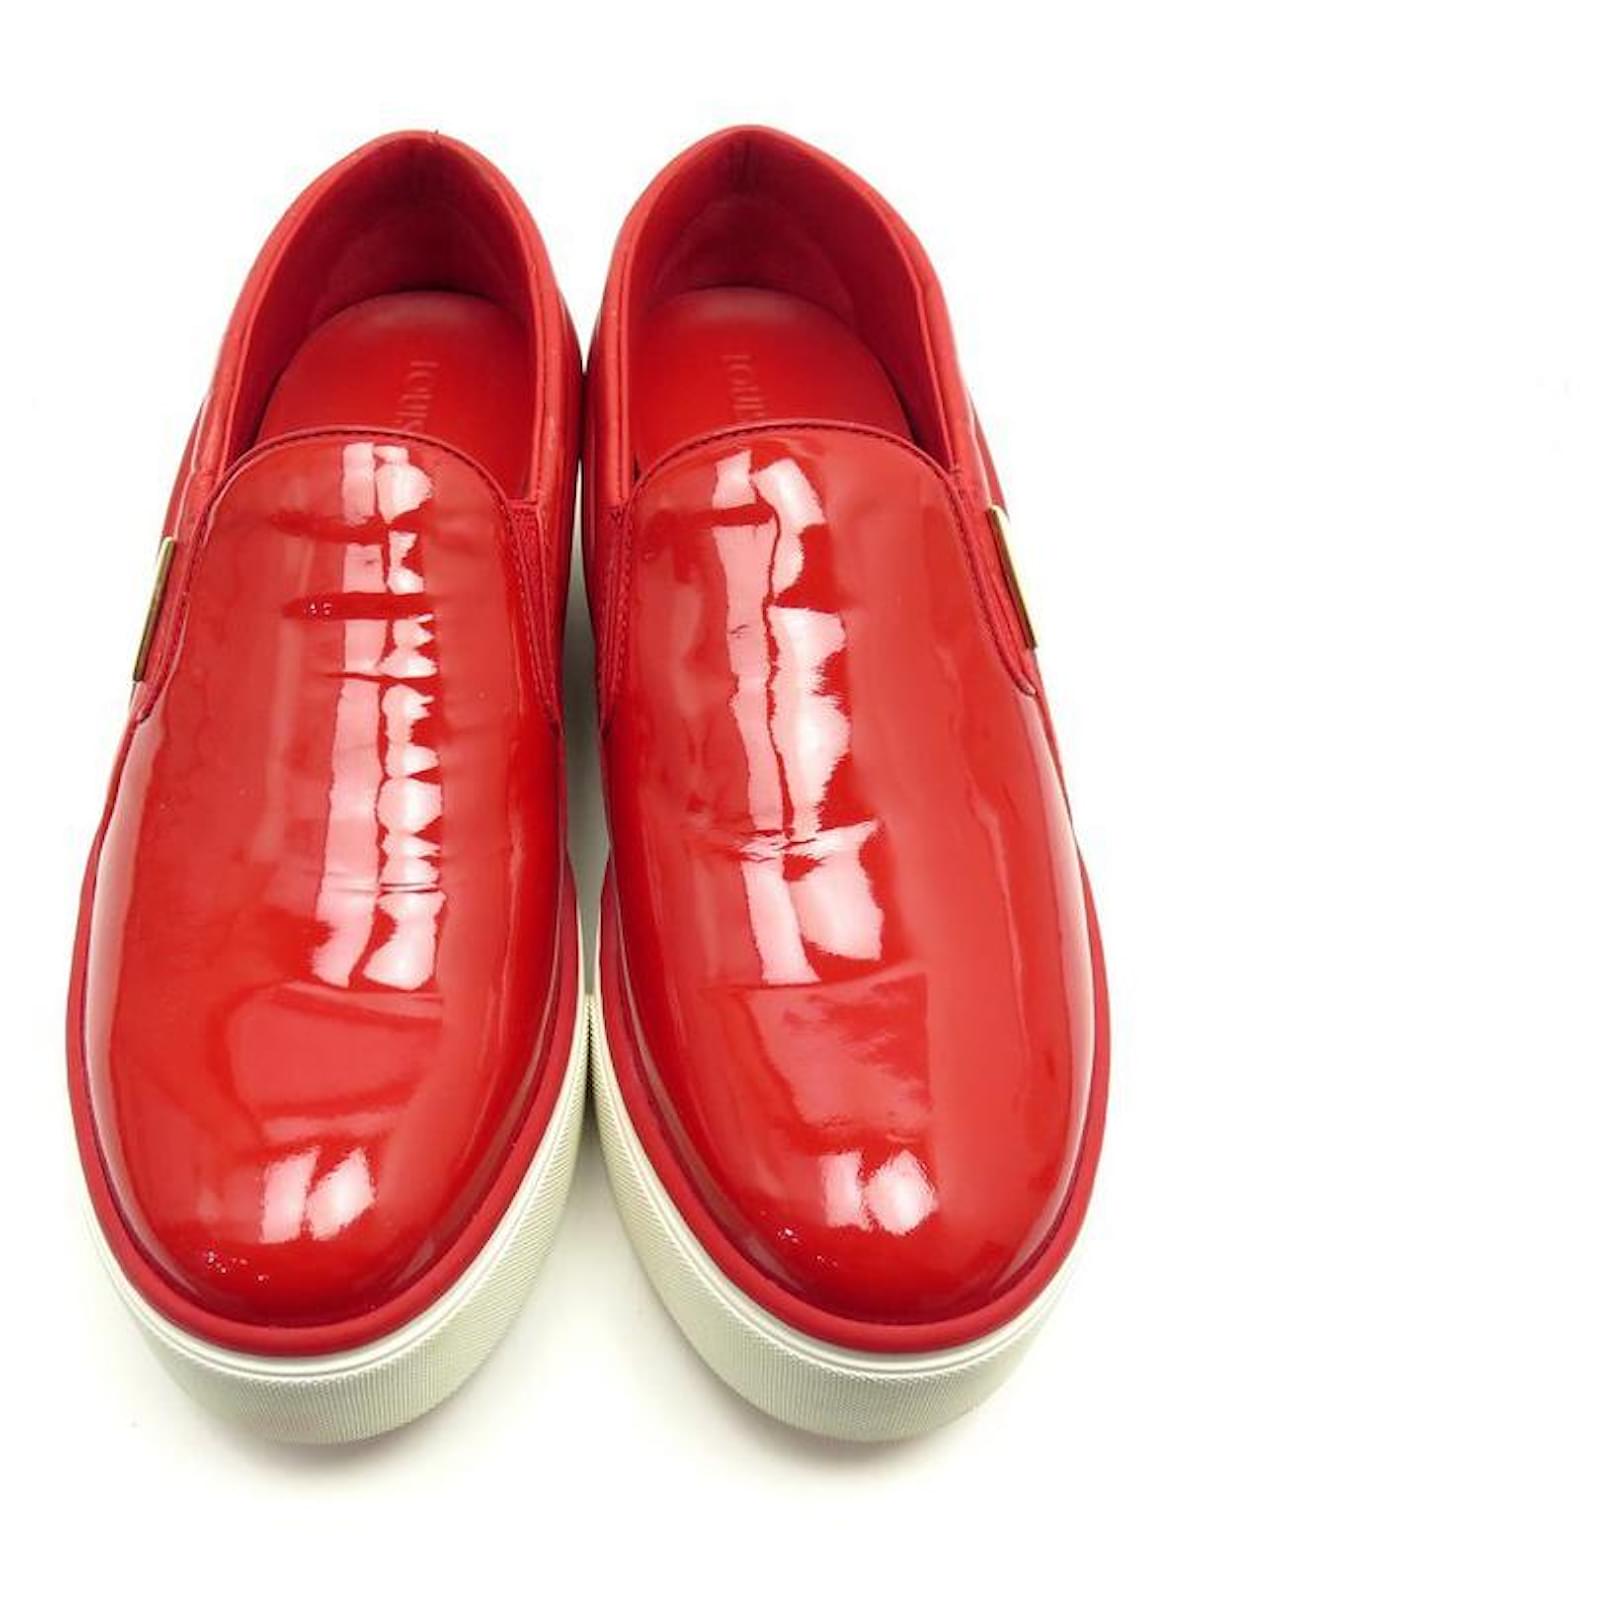 NEW LOUIS VUITTON BASKETS SLIP ON SHOES 36.5 RED PATENT LEATHER